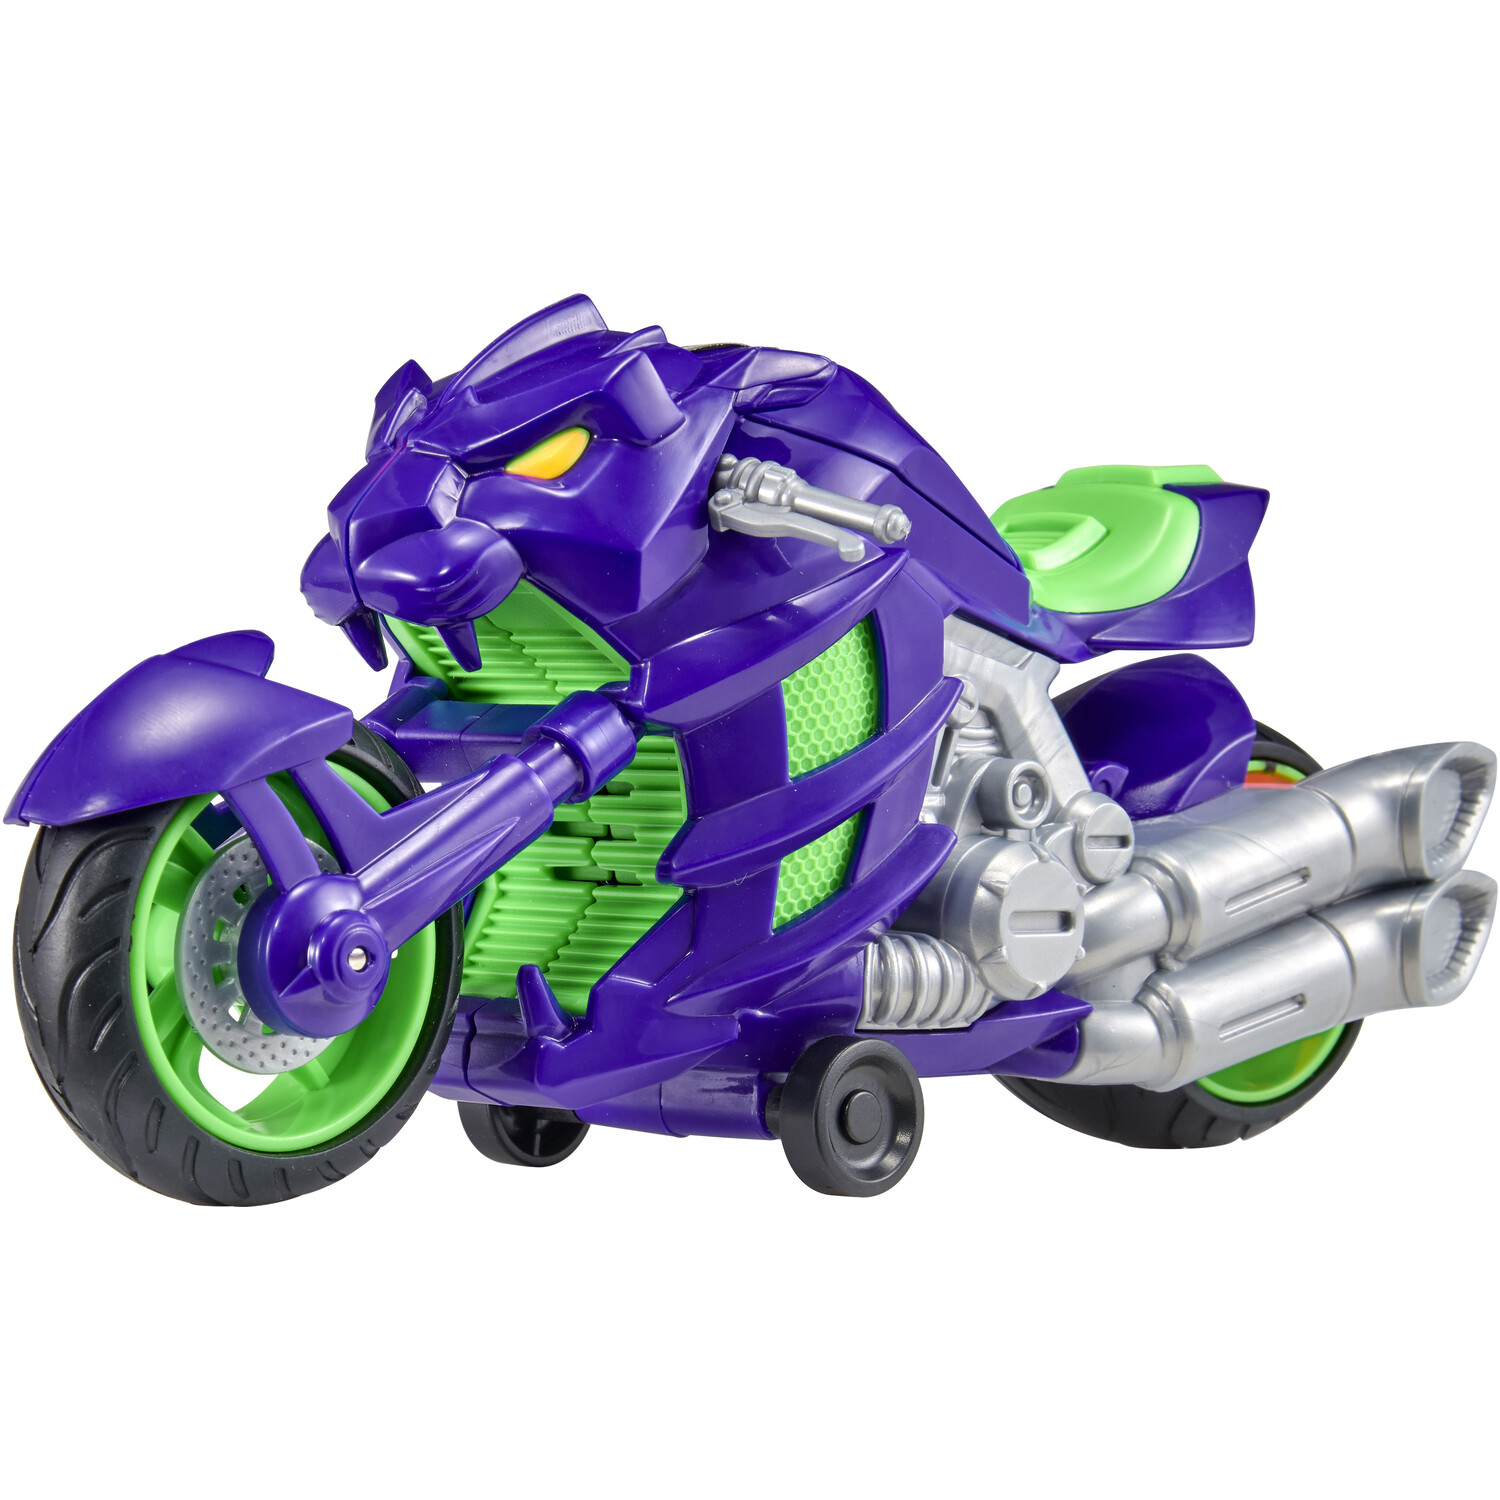 Single Teamsterz Monster Moverz Night Panther Motorbike in Assorted style Image 4